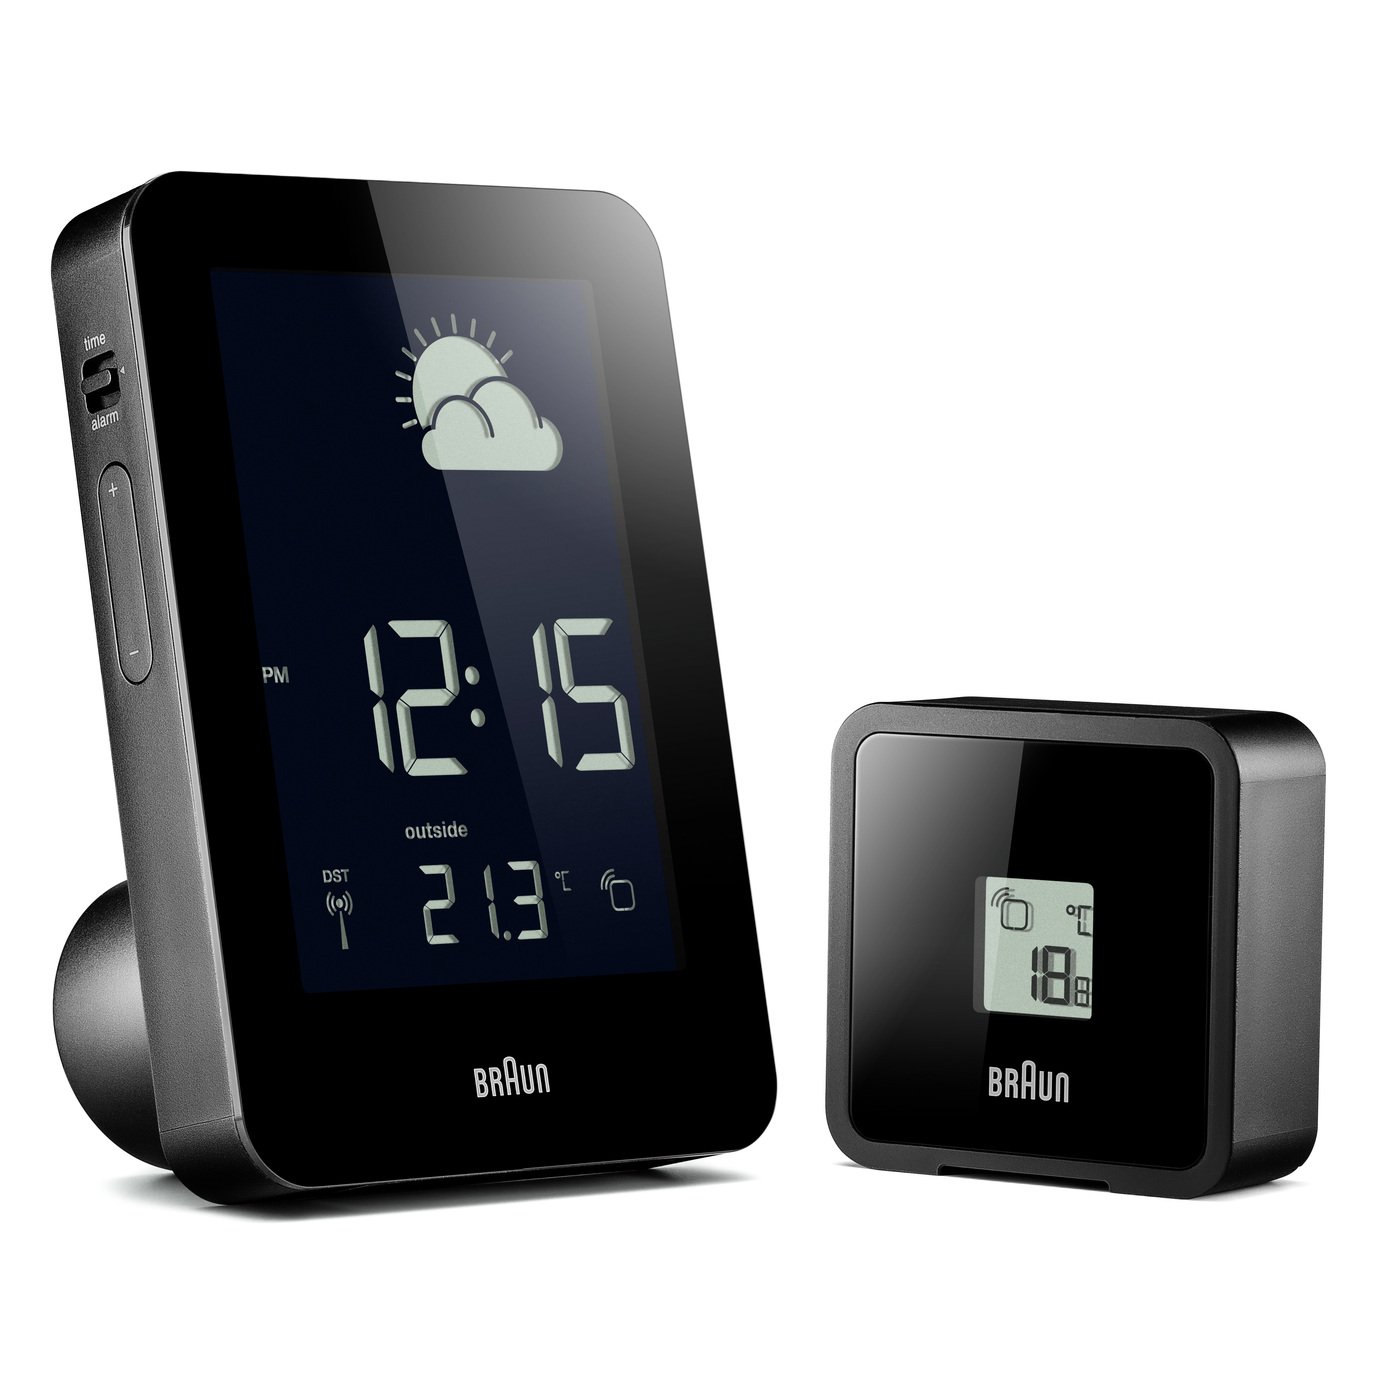 Braun Weather Station Review